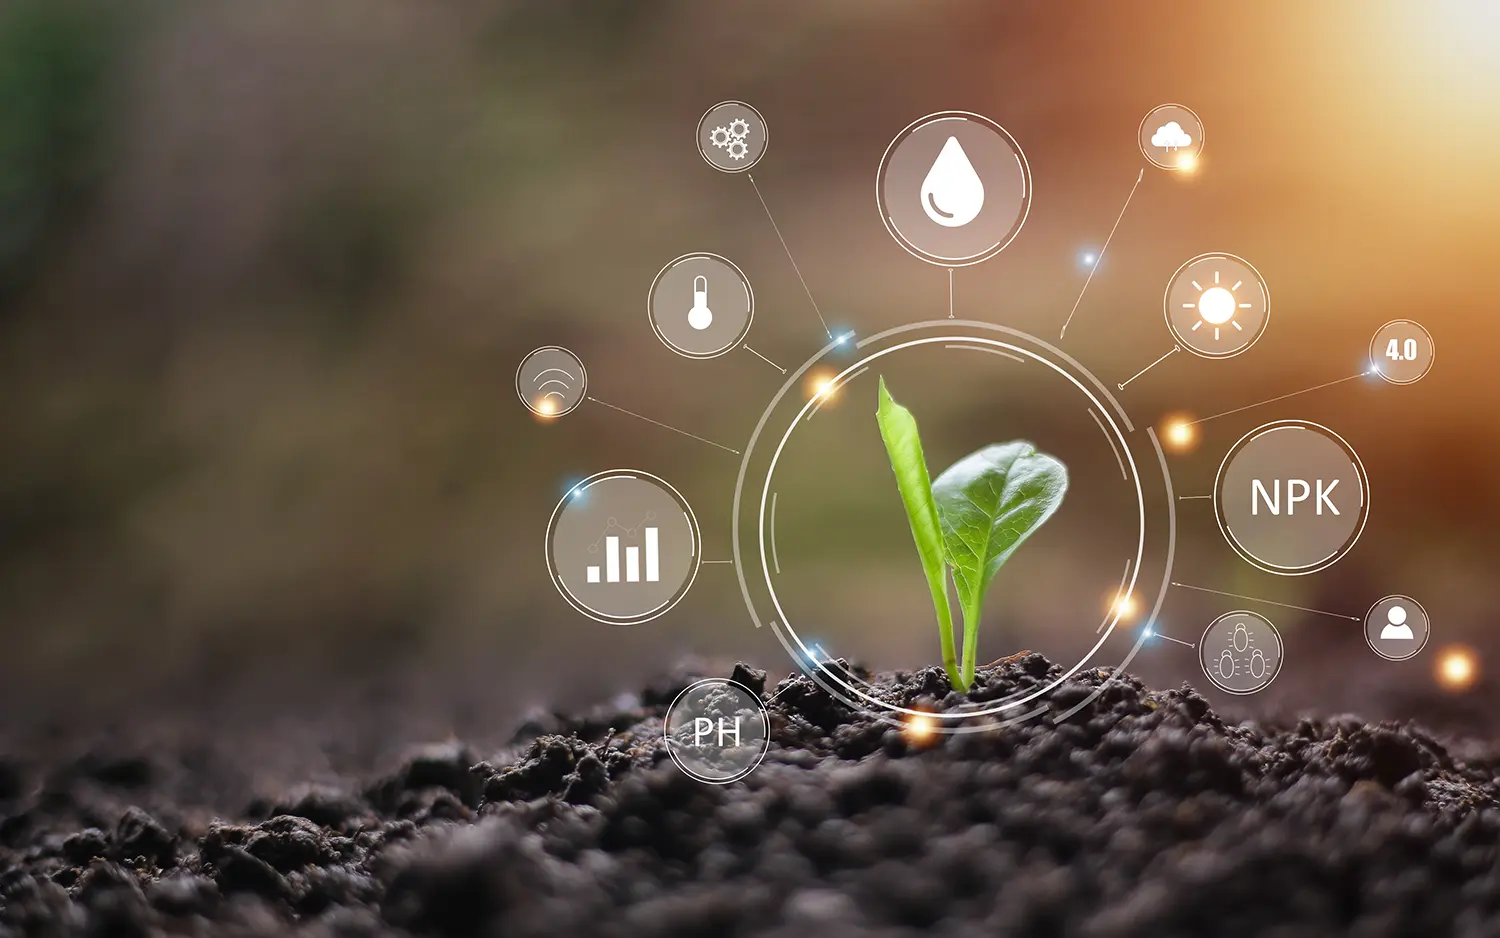 agricultural growth concept It has both the benefits of soil and plants. Including the use of artificial intelligence agriculture technology in smart farms for seed and crop tracking, 5G Industry 4.0 technology that needs to be improved. ai smart farming and precise agriculture